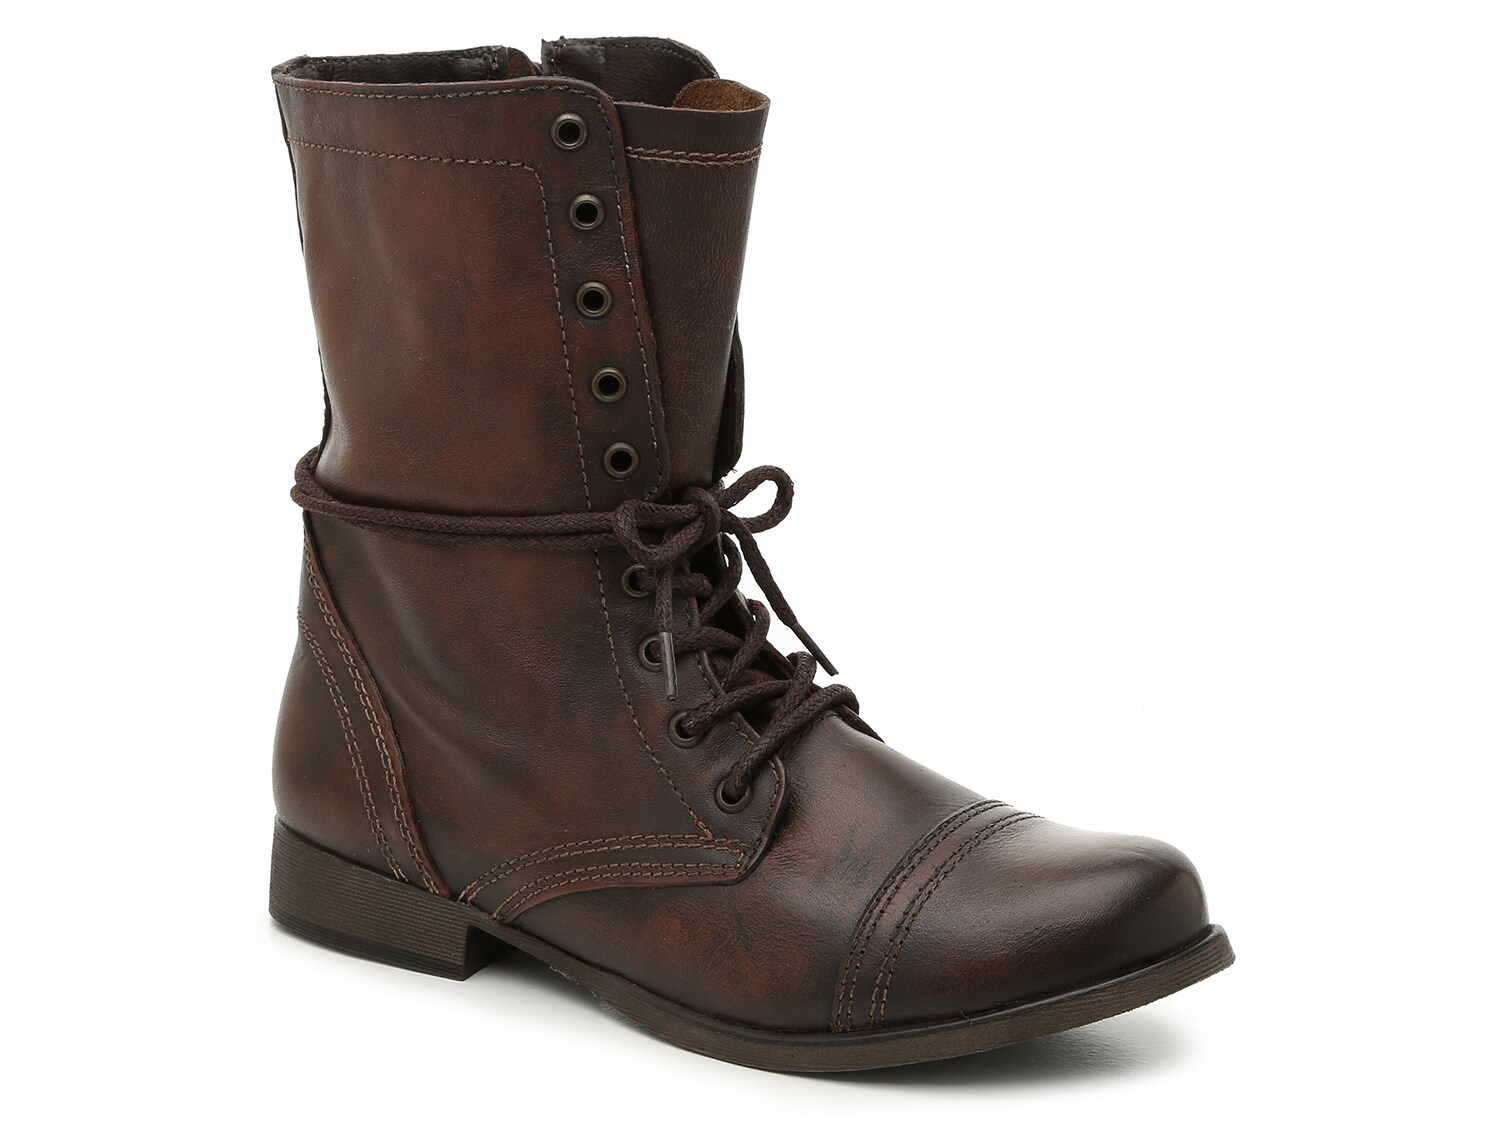 madden troopa boot